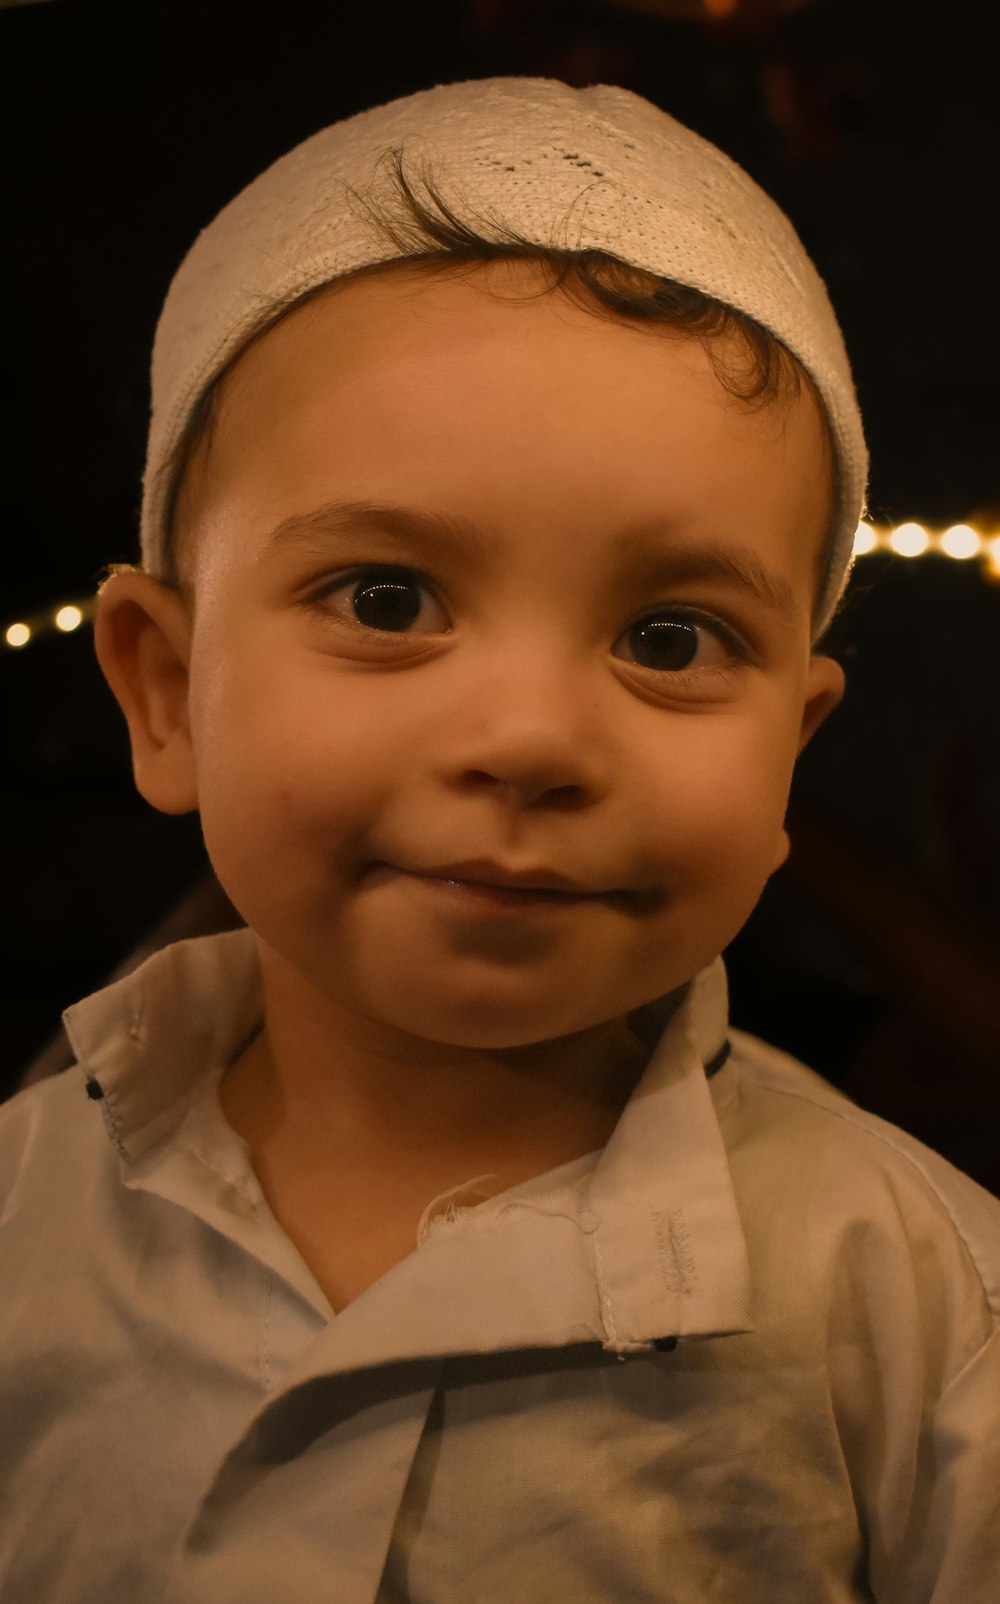 a close up of a child wearing a hat